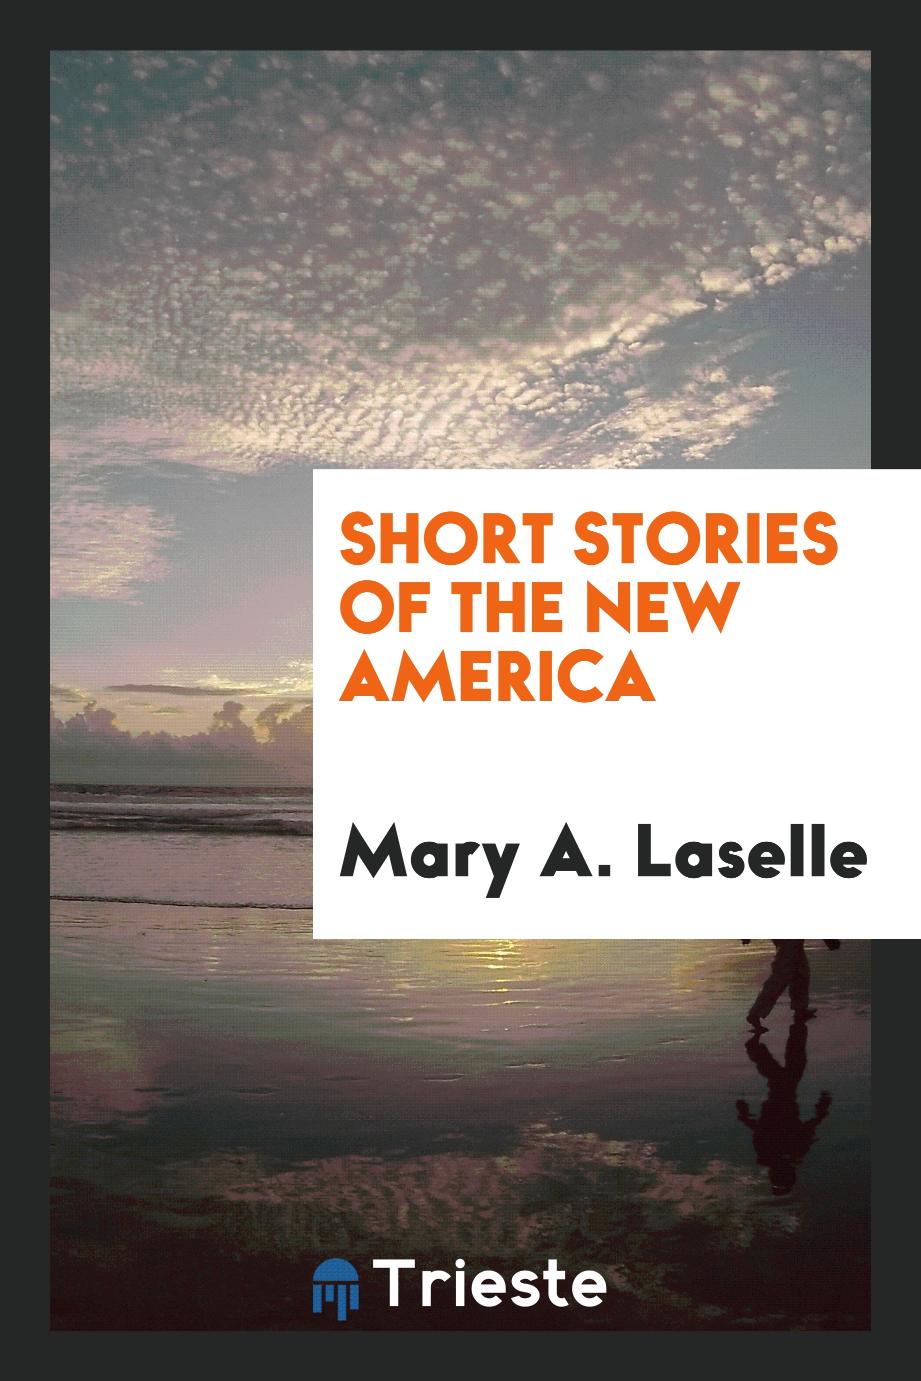 Short stories of the new America